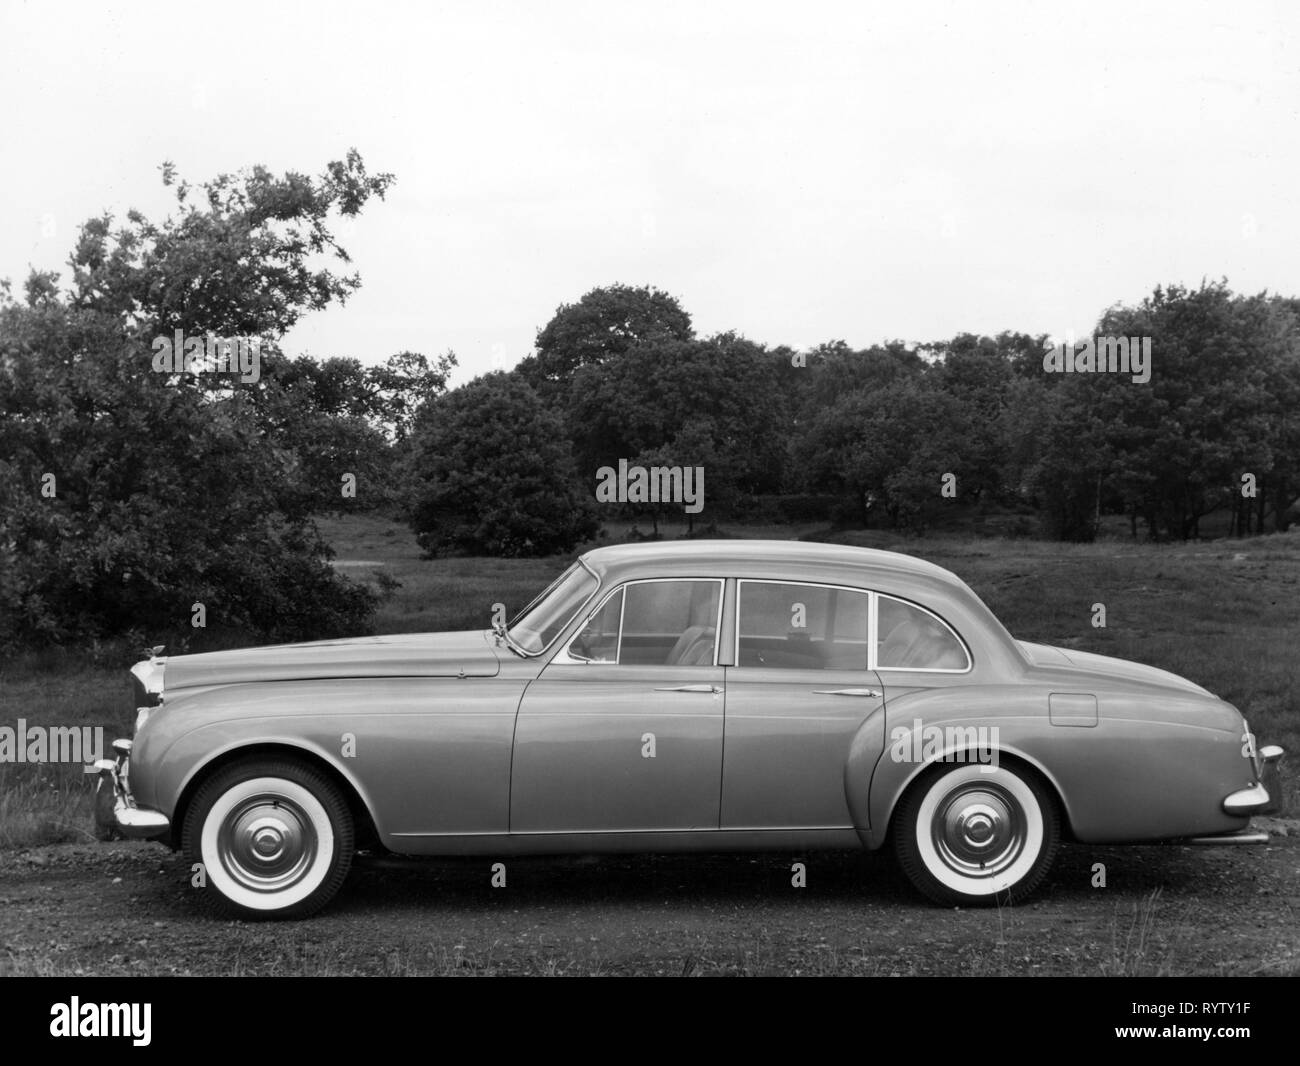 transport / transportation, car, vehicle variants, Bentley S2 Continental 'Flying Spur', 1959 - 1962, car body from H. J. Mulliner, view from left, S 2, side view, upper class, upper-class, luxury, luxuries, class deluxe, limousine, four-door, clipping, cut out, cut-out, cut-outs, motor car, auto, automobile, passenger car, motorcar, motorcars, autos, automobiles, passenger cars, Great Britain, United Kingdom, 1950s, 50s, 1960s, 60s, 20th century, transport, transportation, car, cars, car body, vehicle body, body, bodywork, car bodies, view, view, Additional-Rights-Clearance-Info-Not-Available Stock Photo